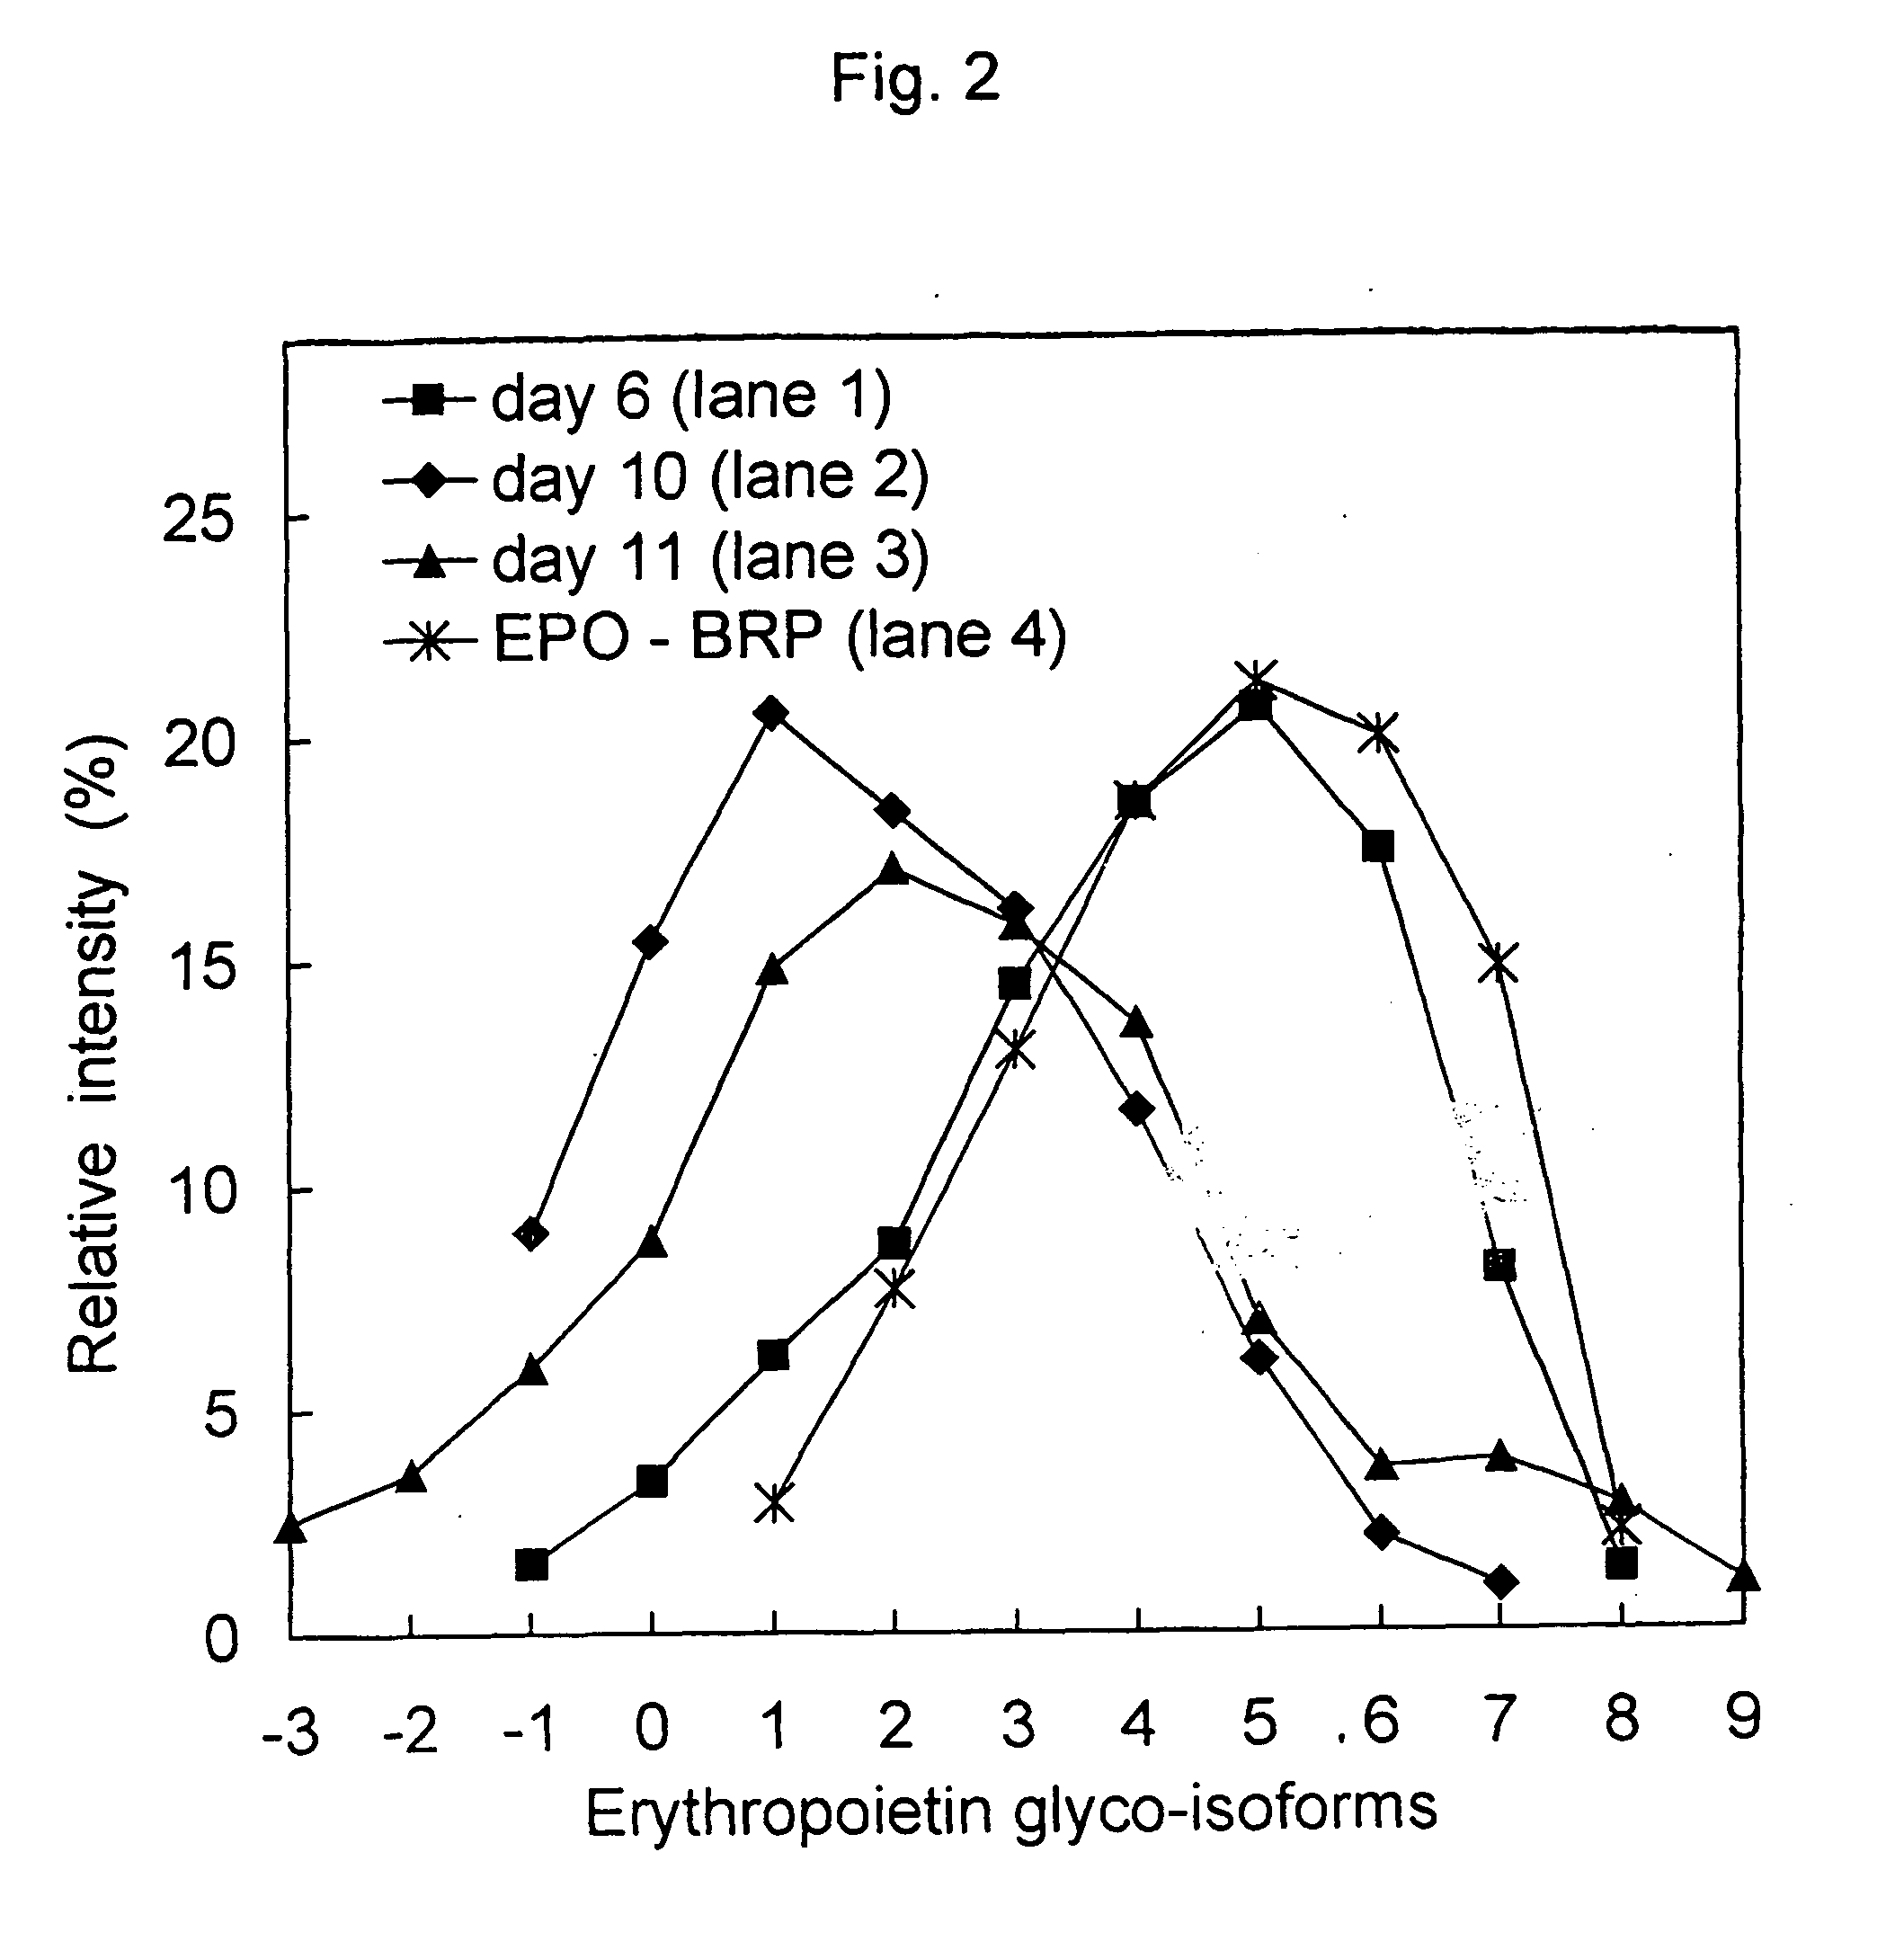 Process for the preparation of a desired erythropoietin glyco-isoform profile